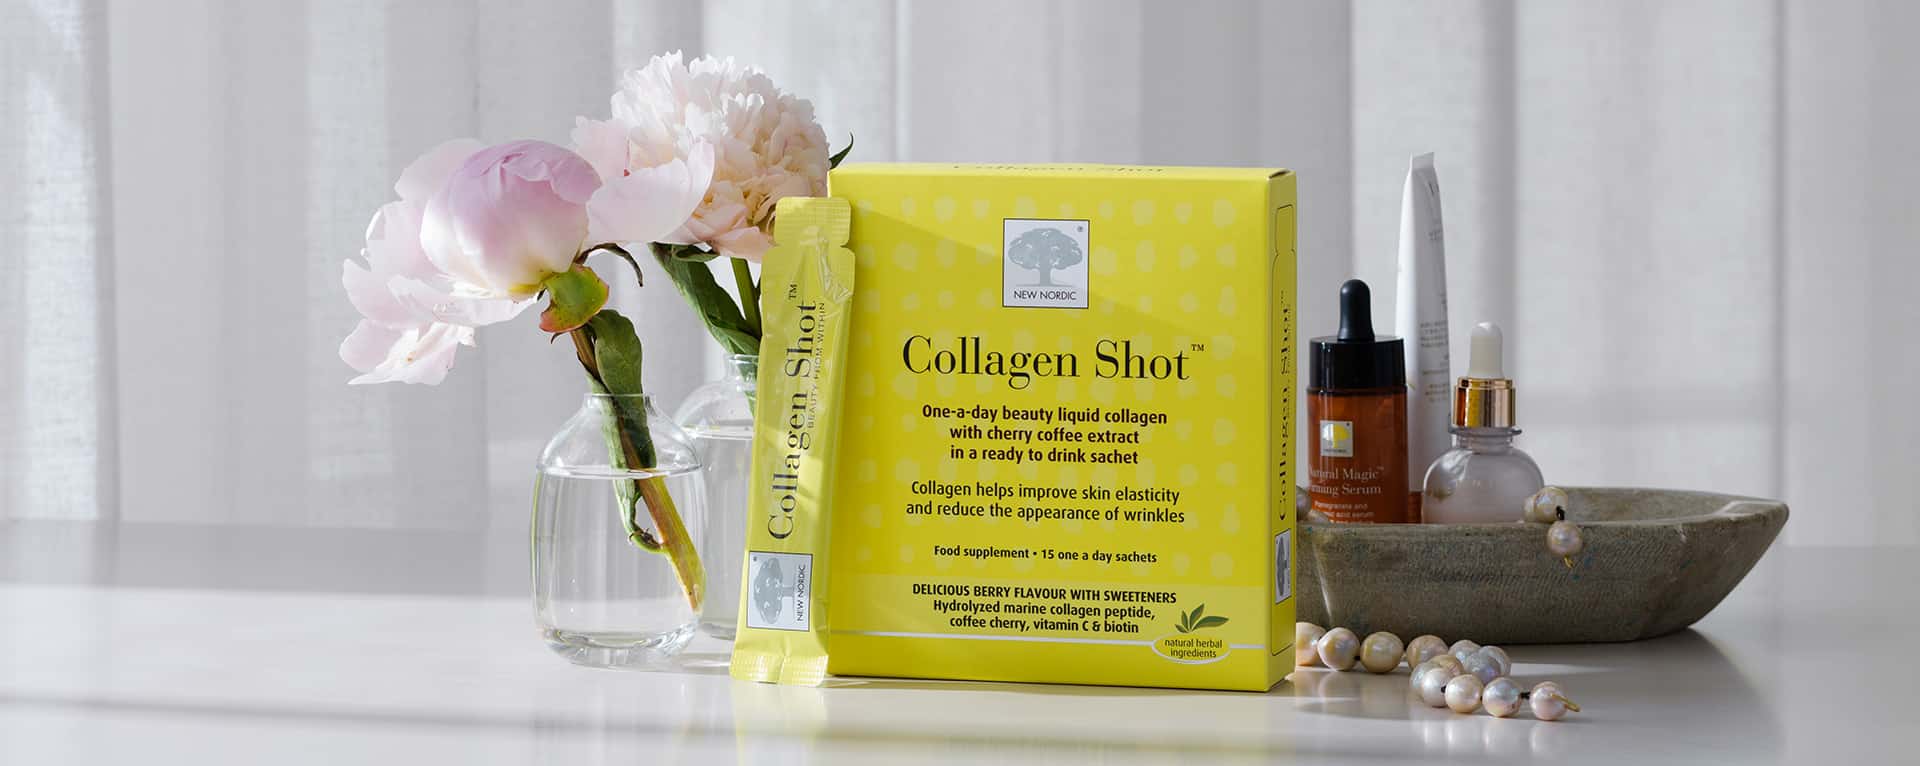 Collagen Shot product with text